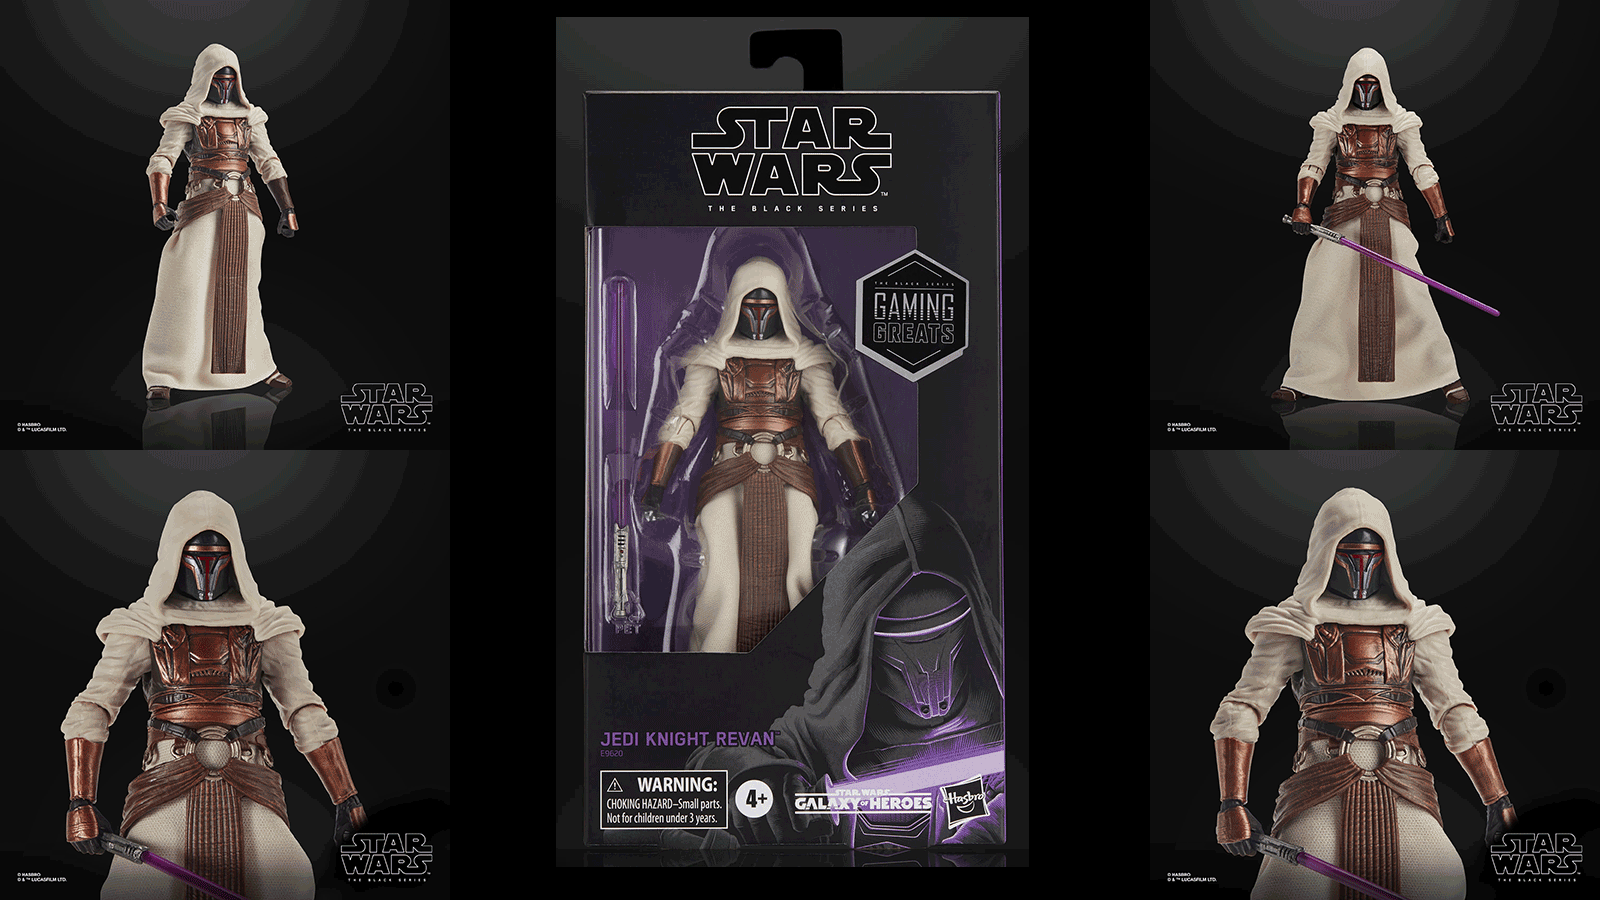 Back In Stock At GameStop.com - Excluisve TBS 6-Inch Gaming Greats Jedi Knight Revan